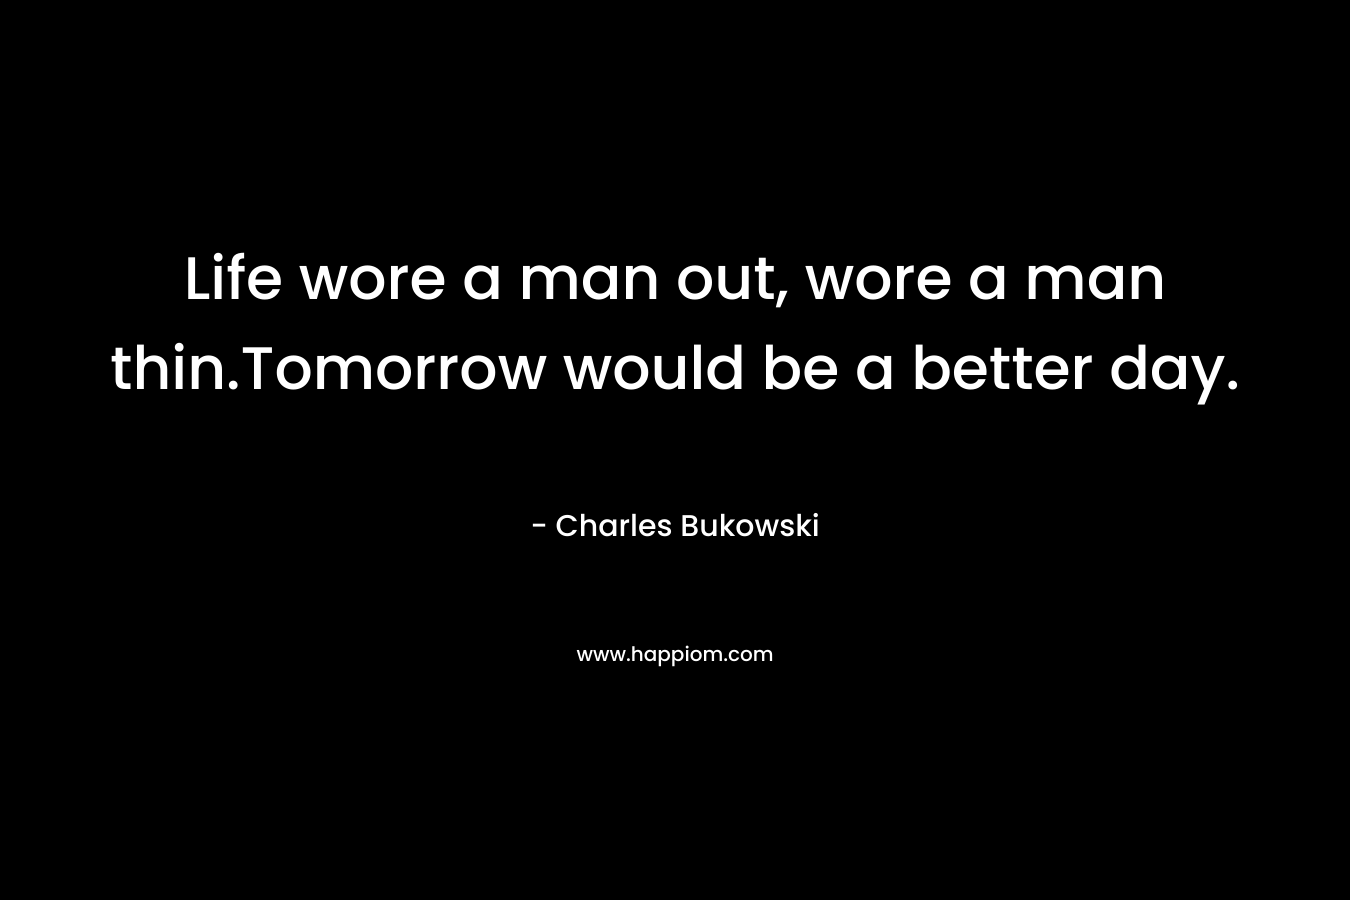 Life wore a man out, wore a man thin.Tomorrow would be a better day. – Charles Bukowski